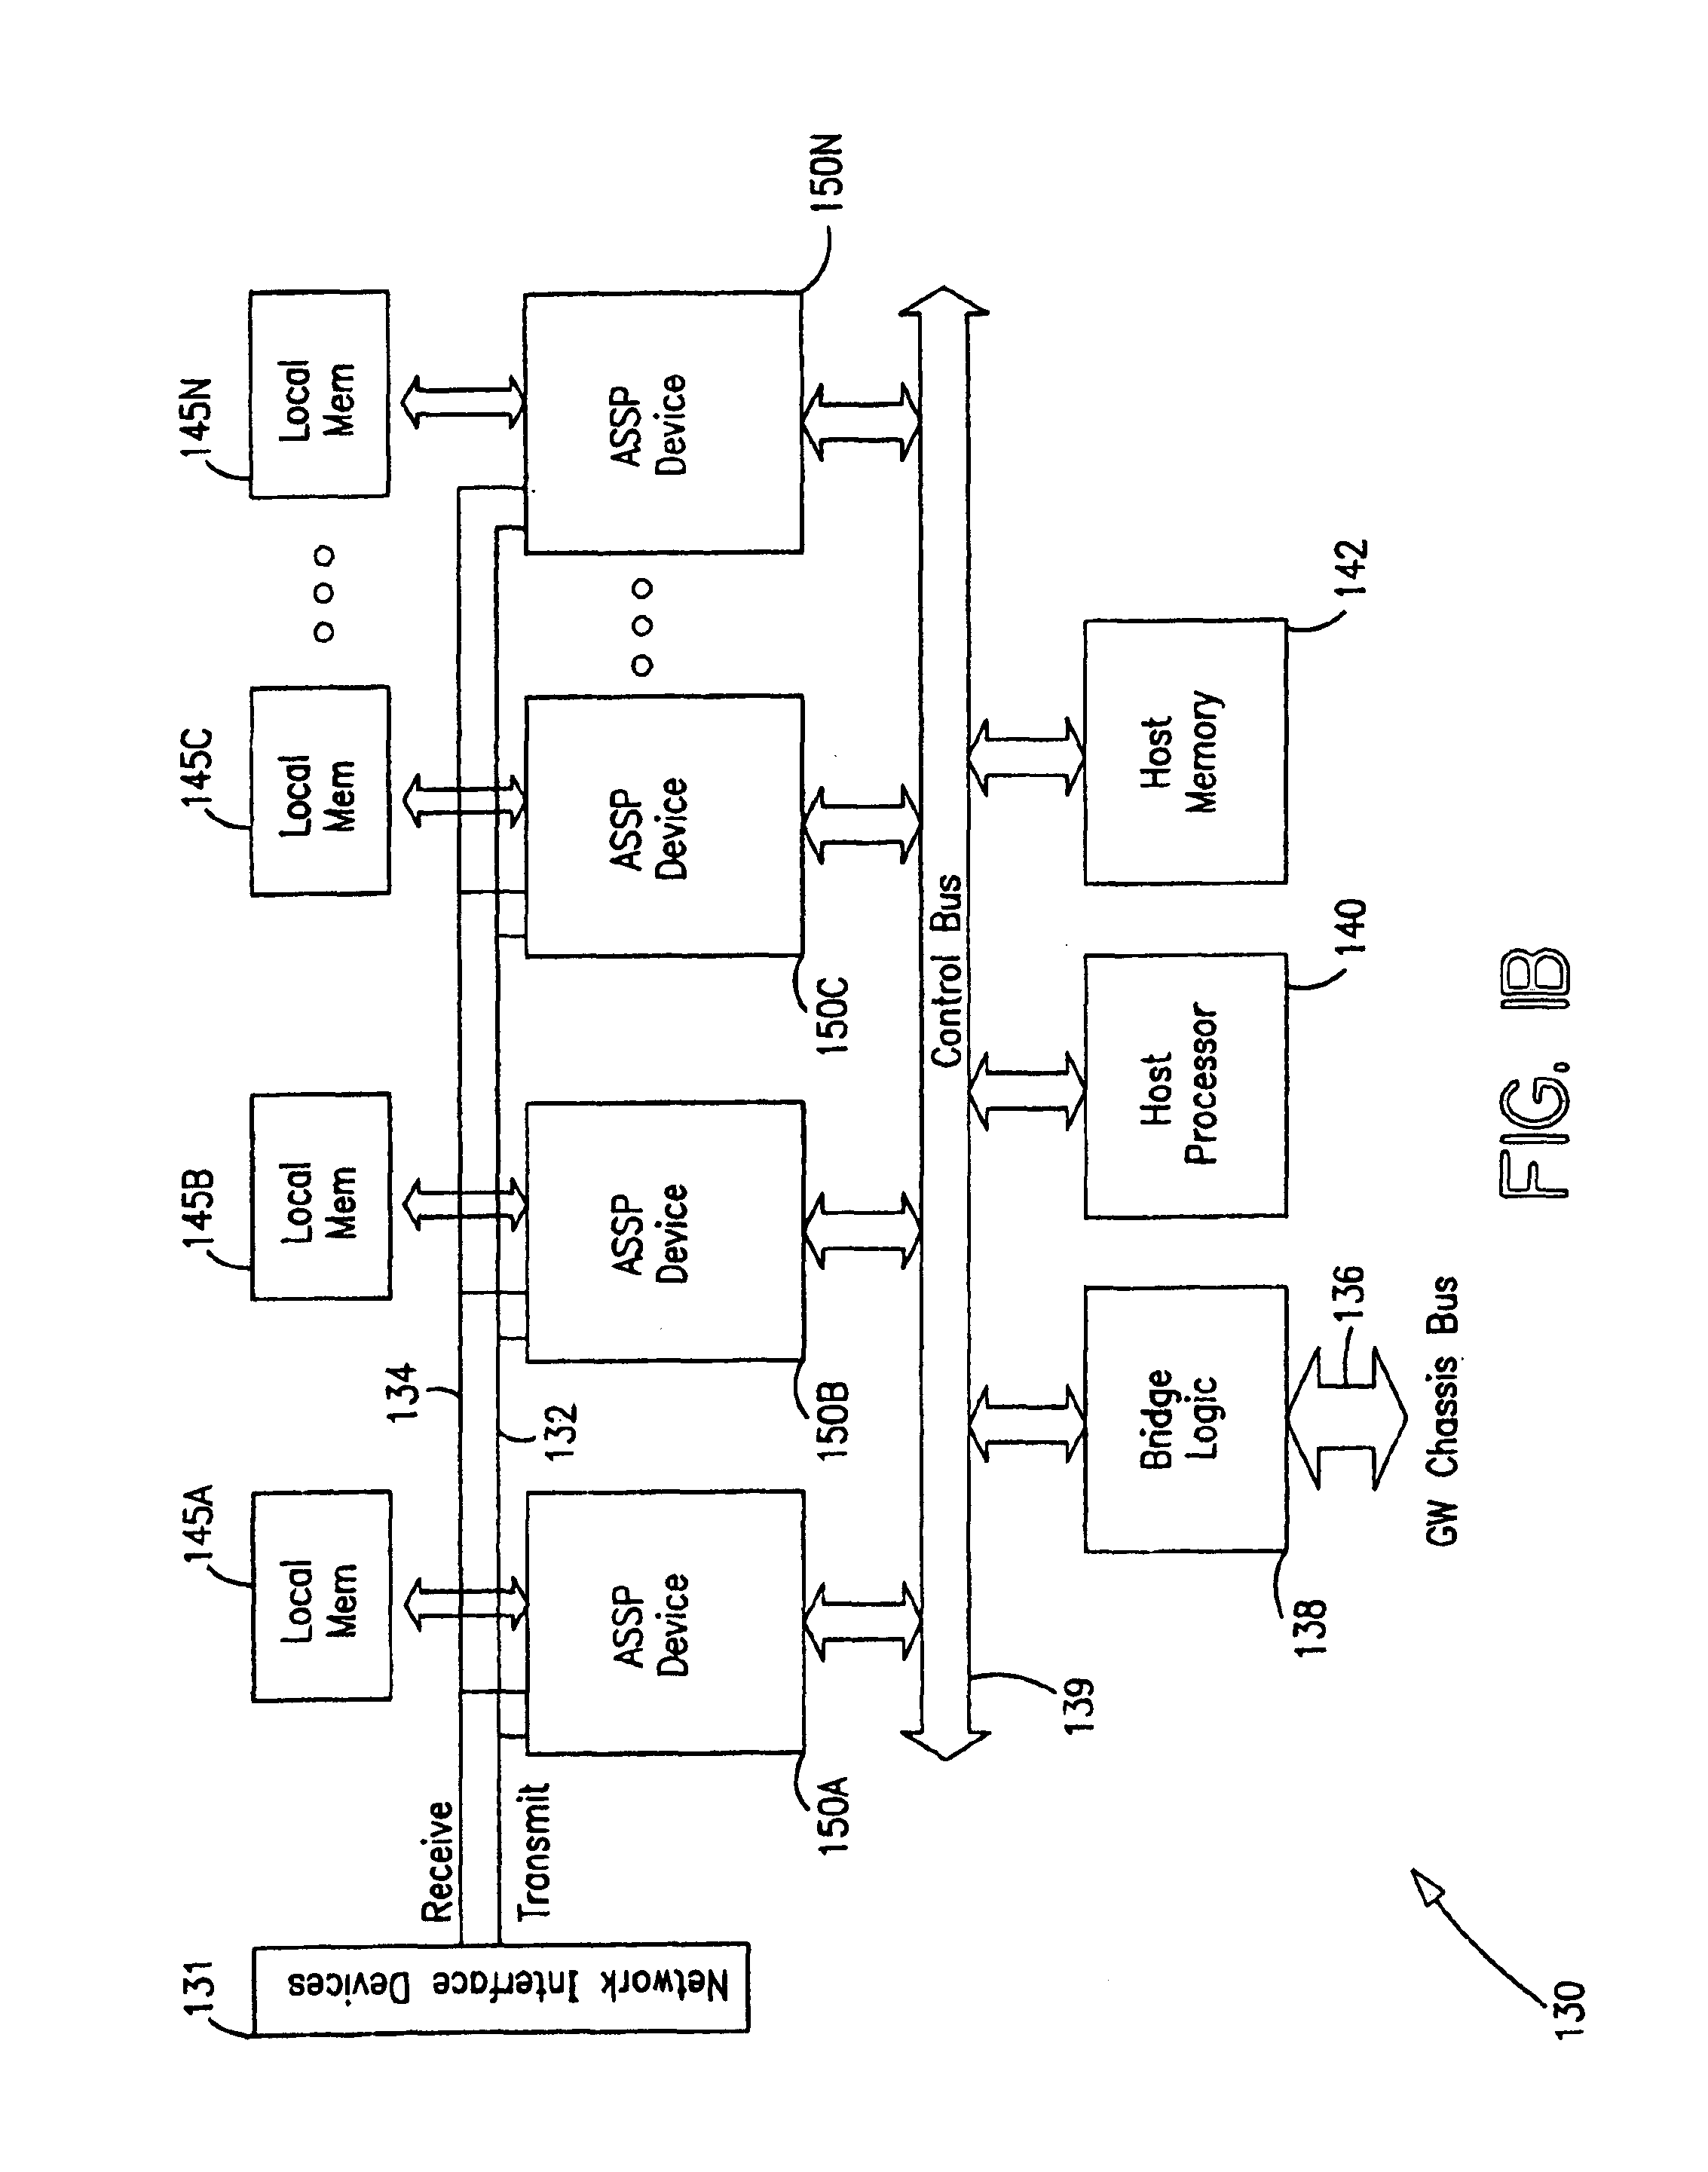 Methods and apparatuses for signal processing